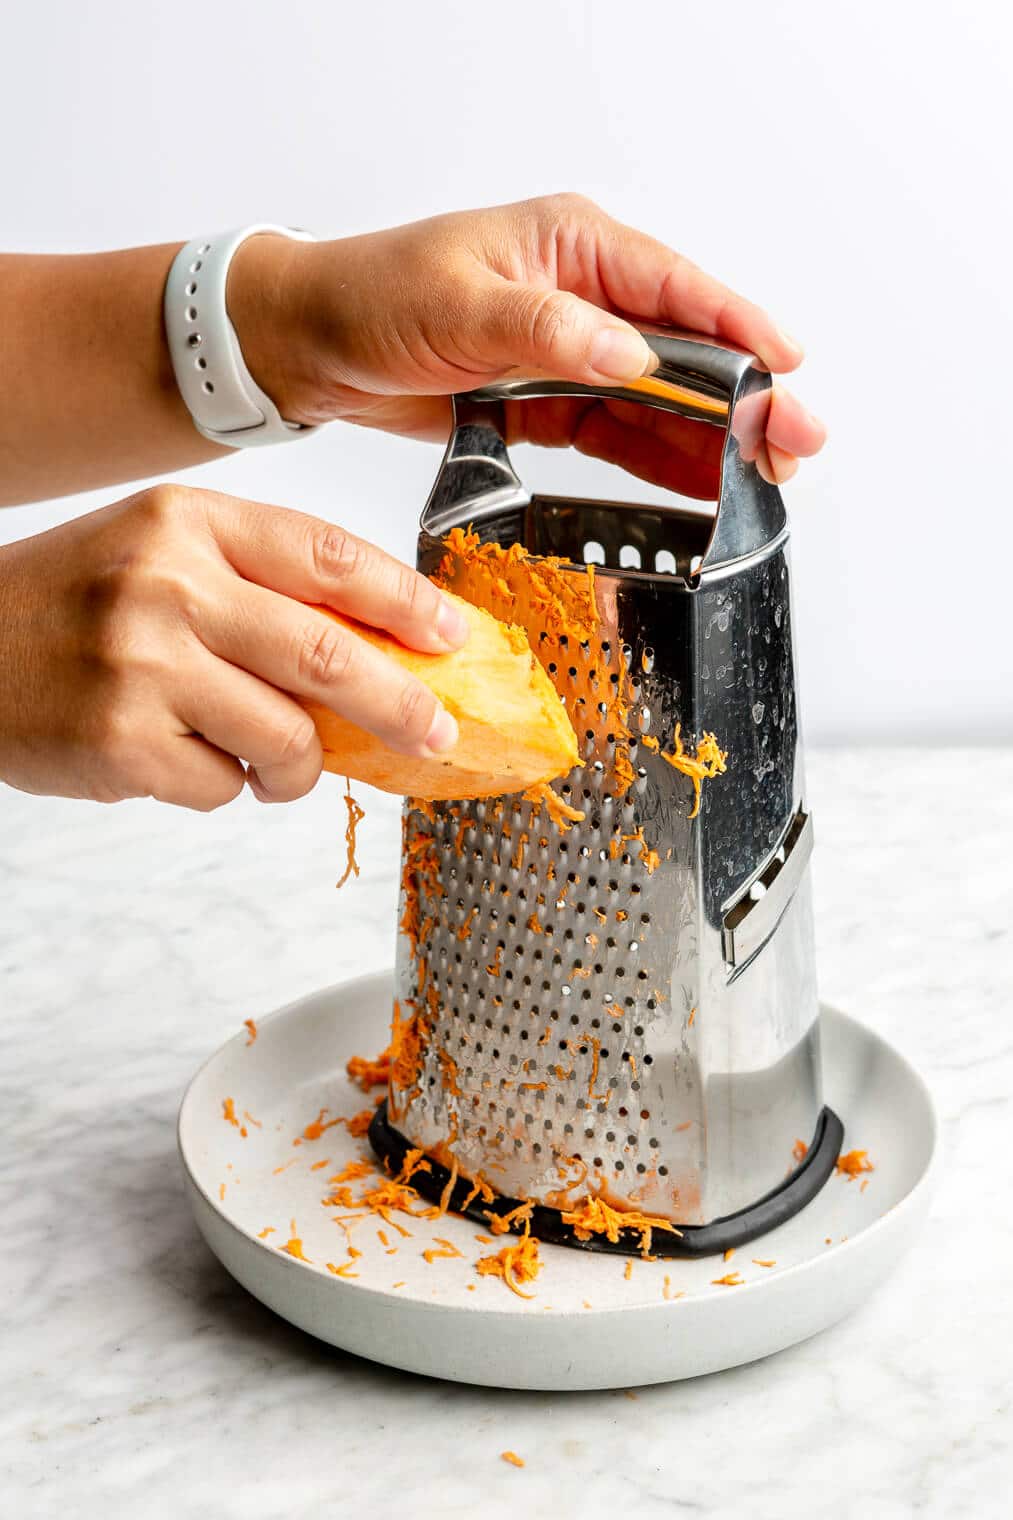 Hand grating a sweet potato using a hand grater over a plate on a grey and white marble surface.